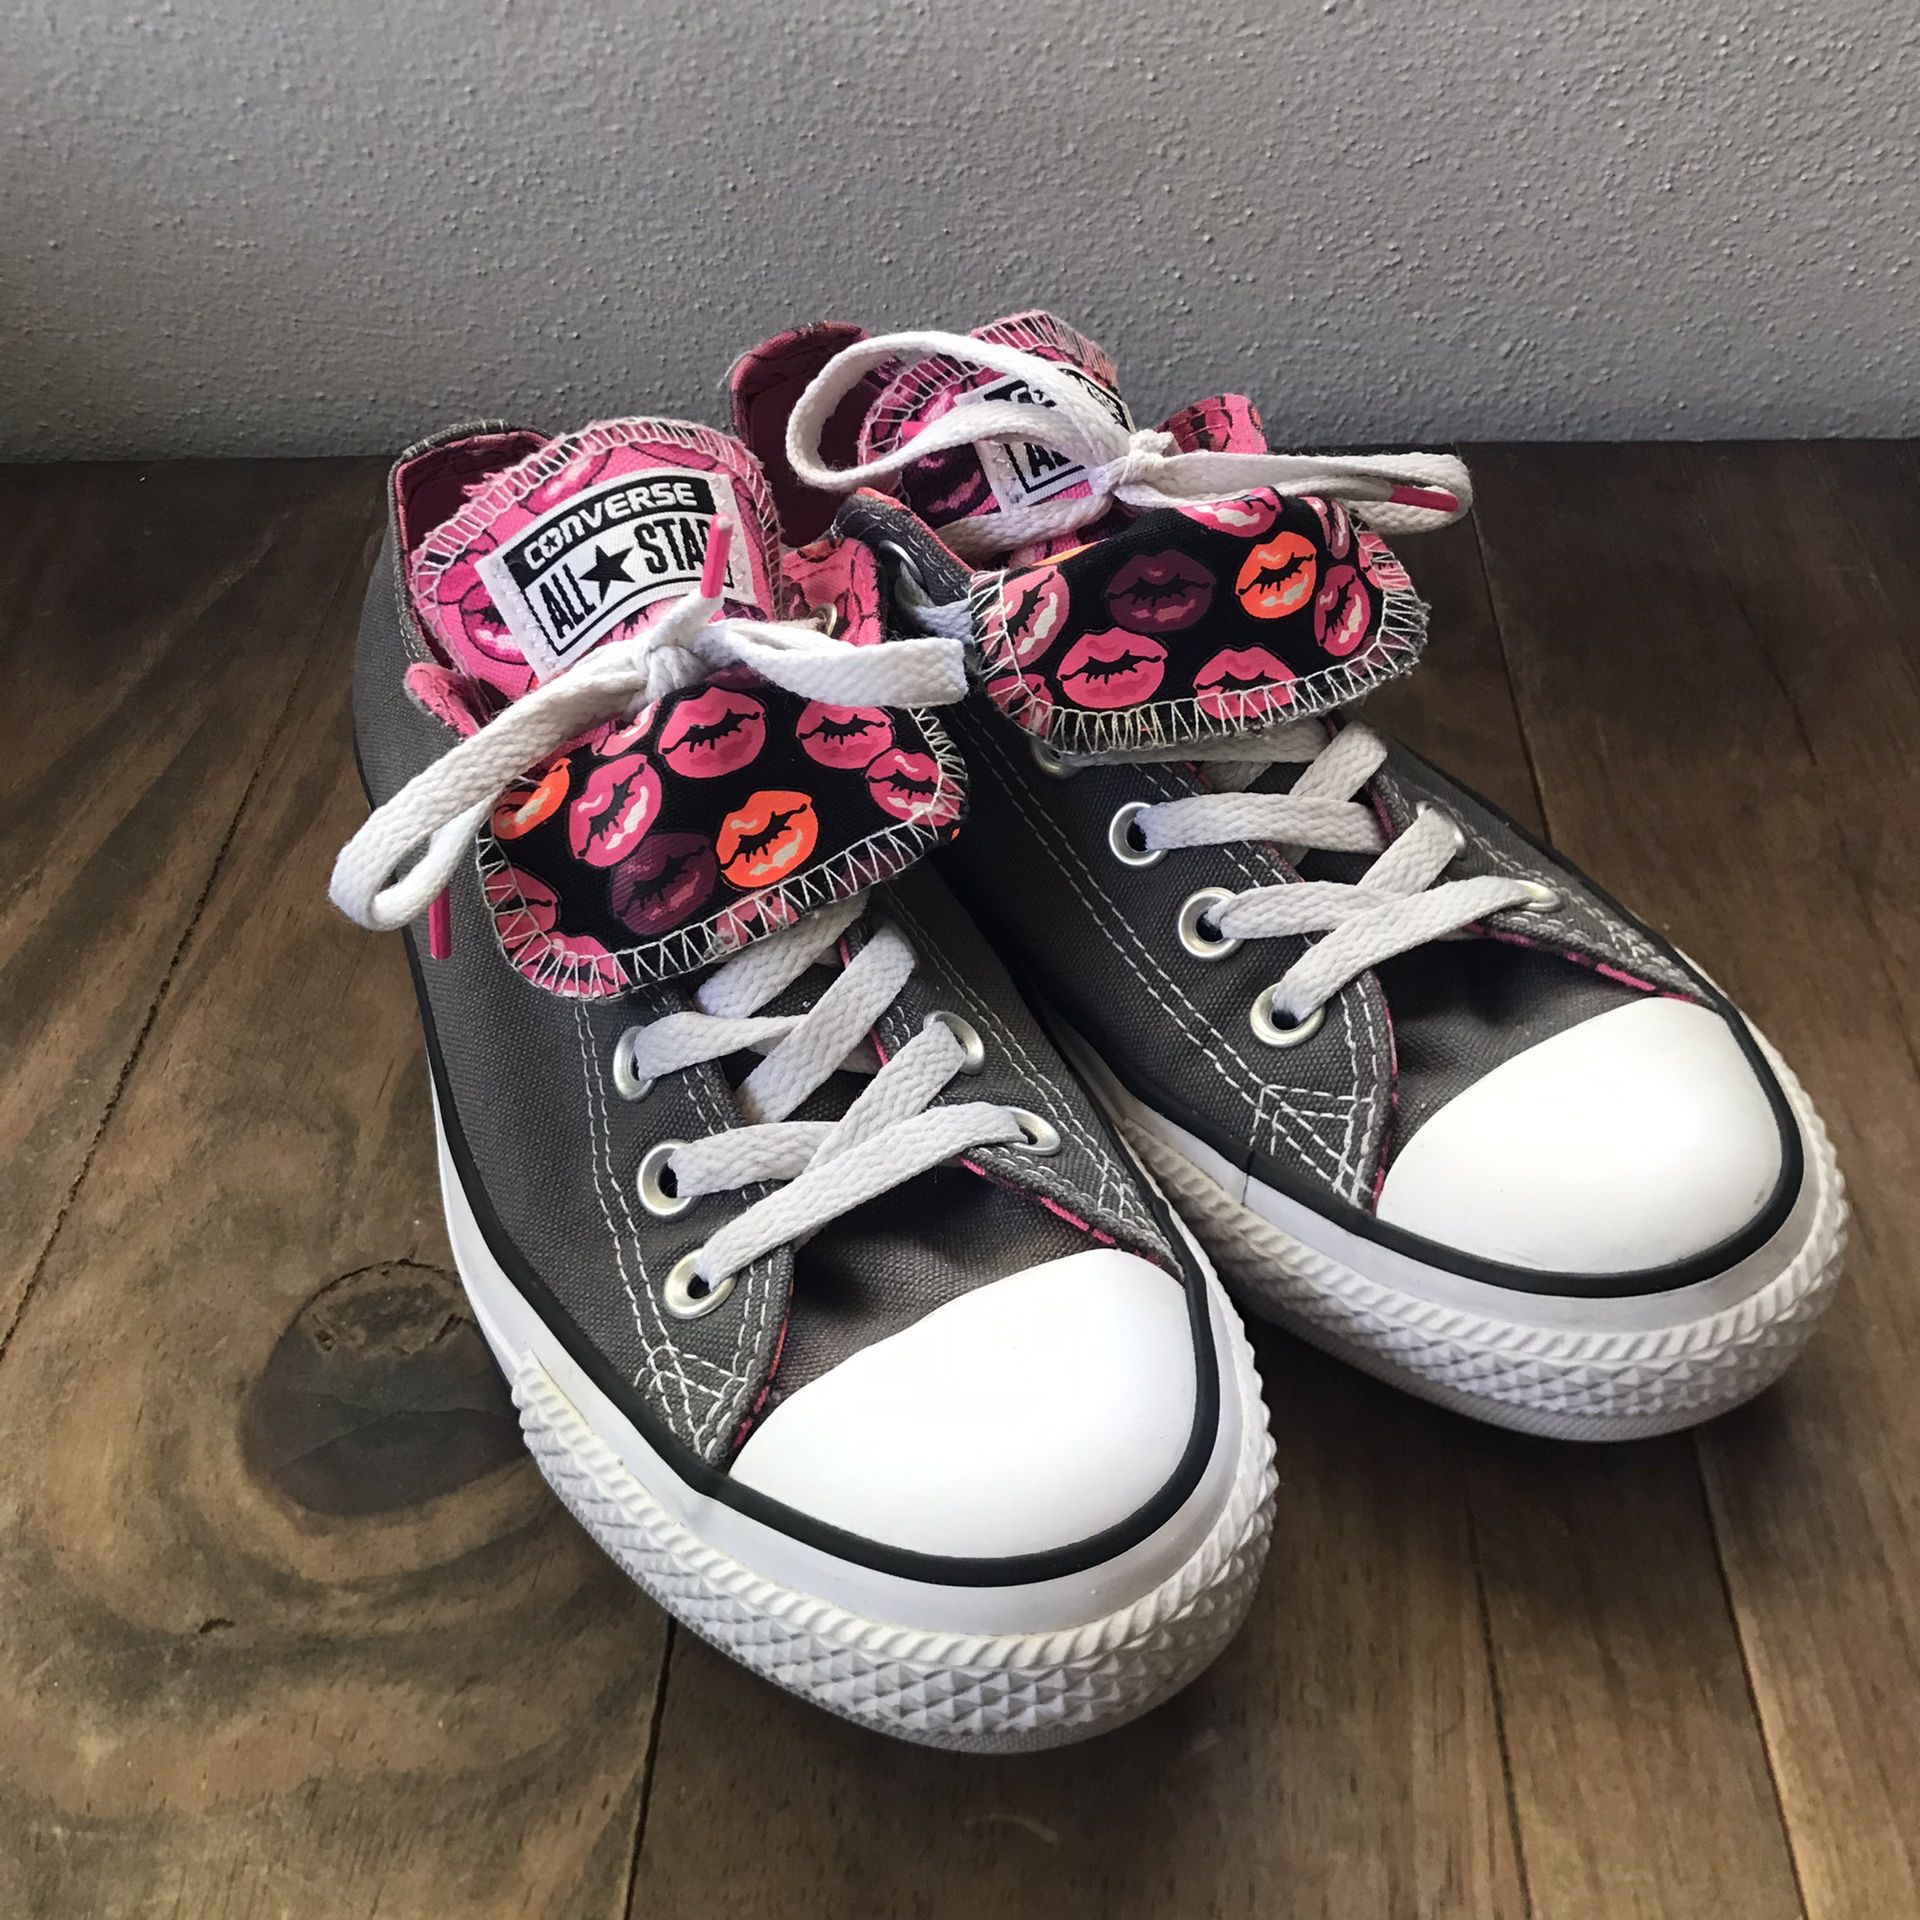 All Star Double Novelty Print Lips Gray Pink Canvas Sneakers for Sale in St. Petersburg, FL -